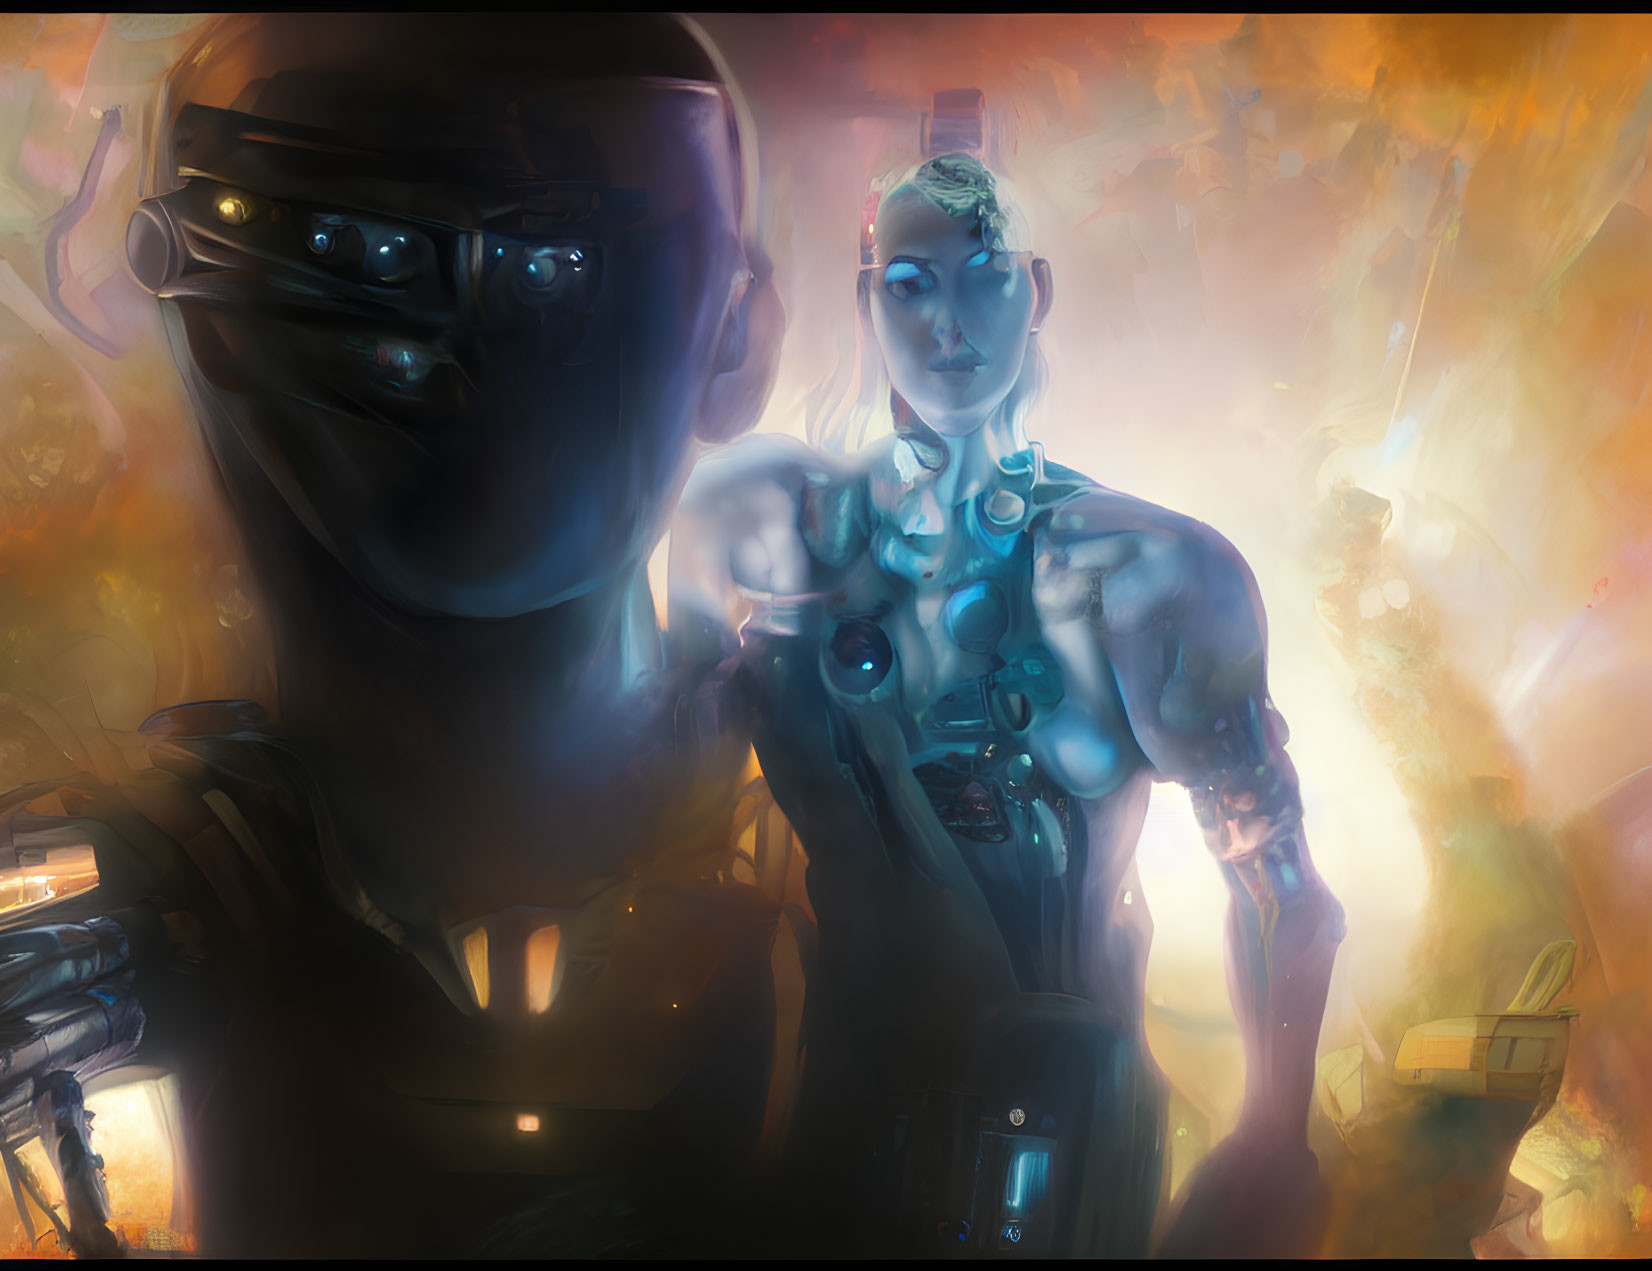 Futuristic androids with glowing eyes in fiery backdrop